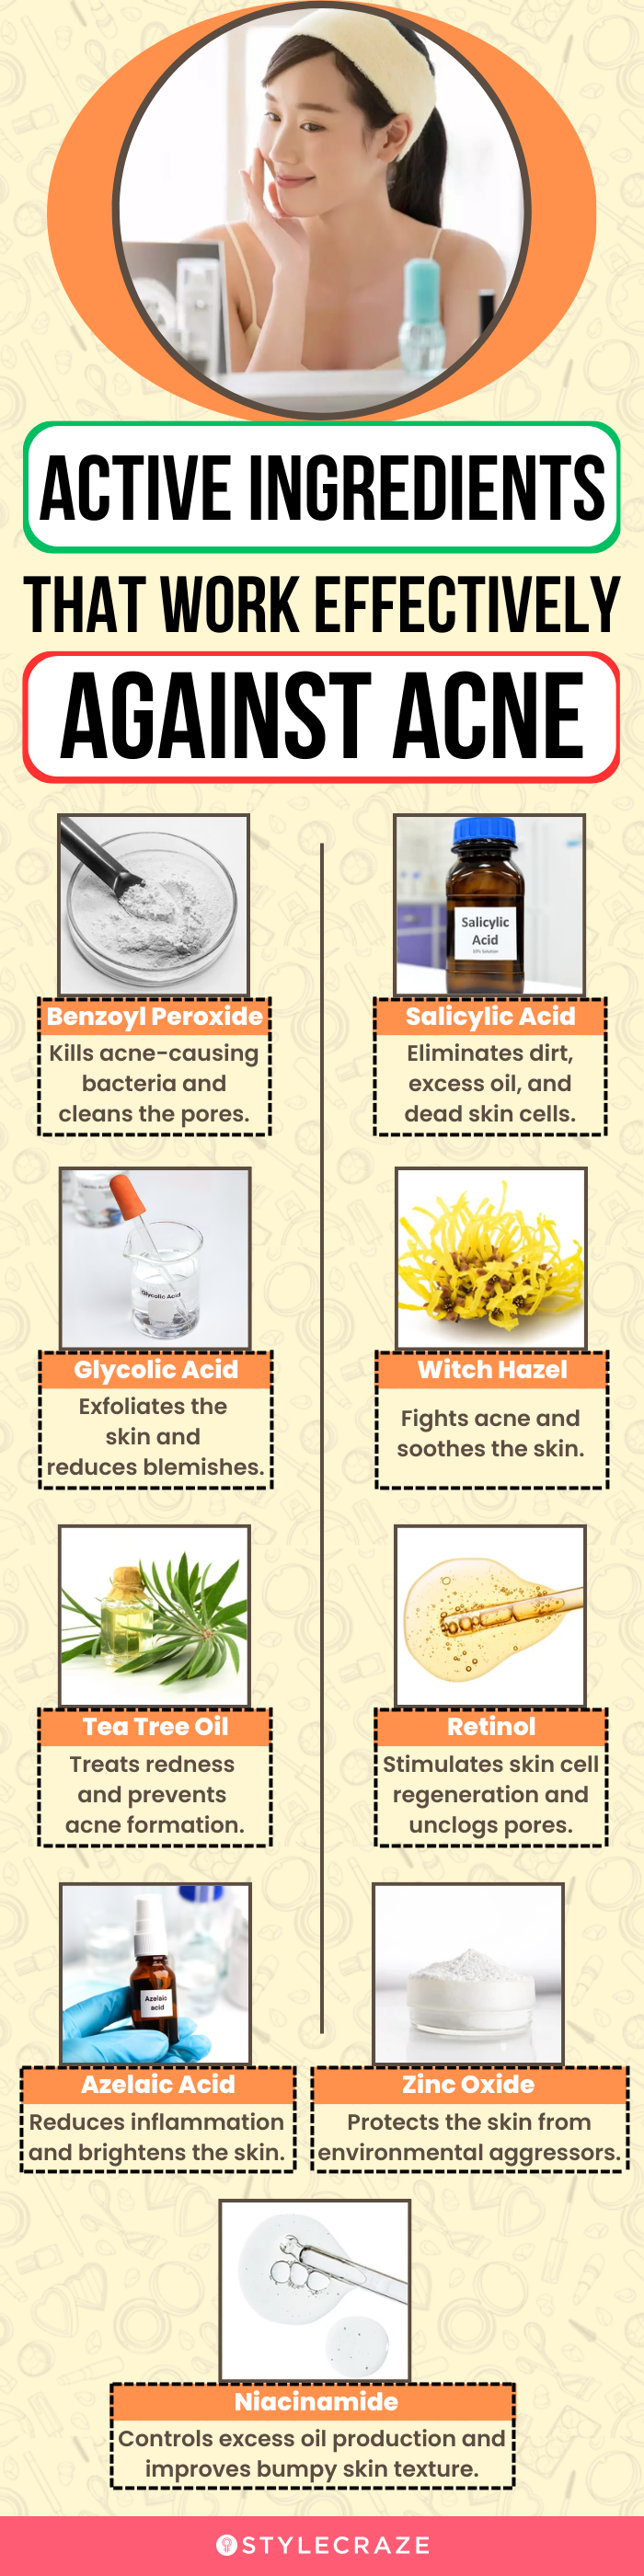 Active Ingredients That Work Effectively Against Acne (infographic)